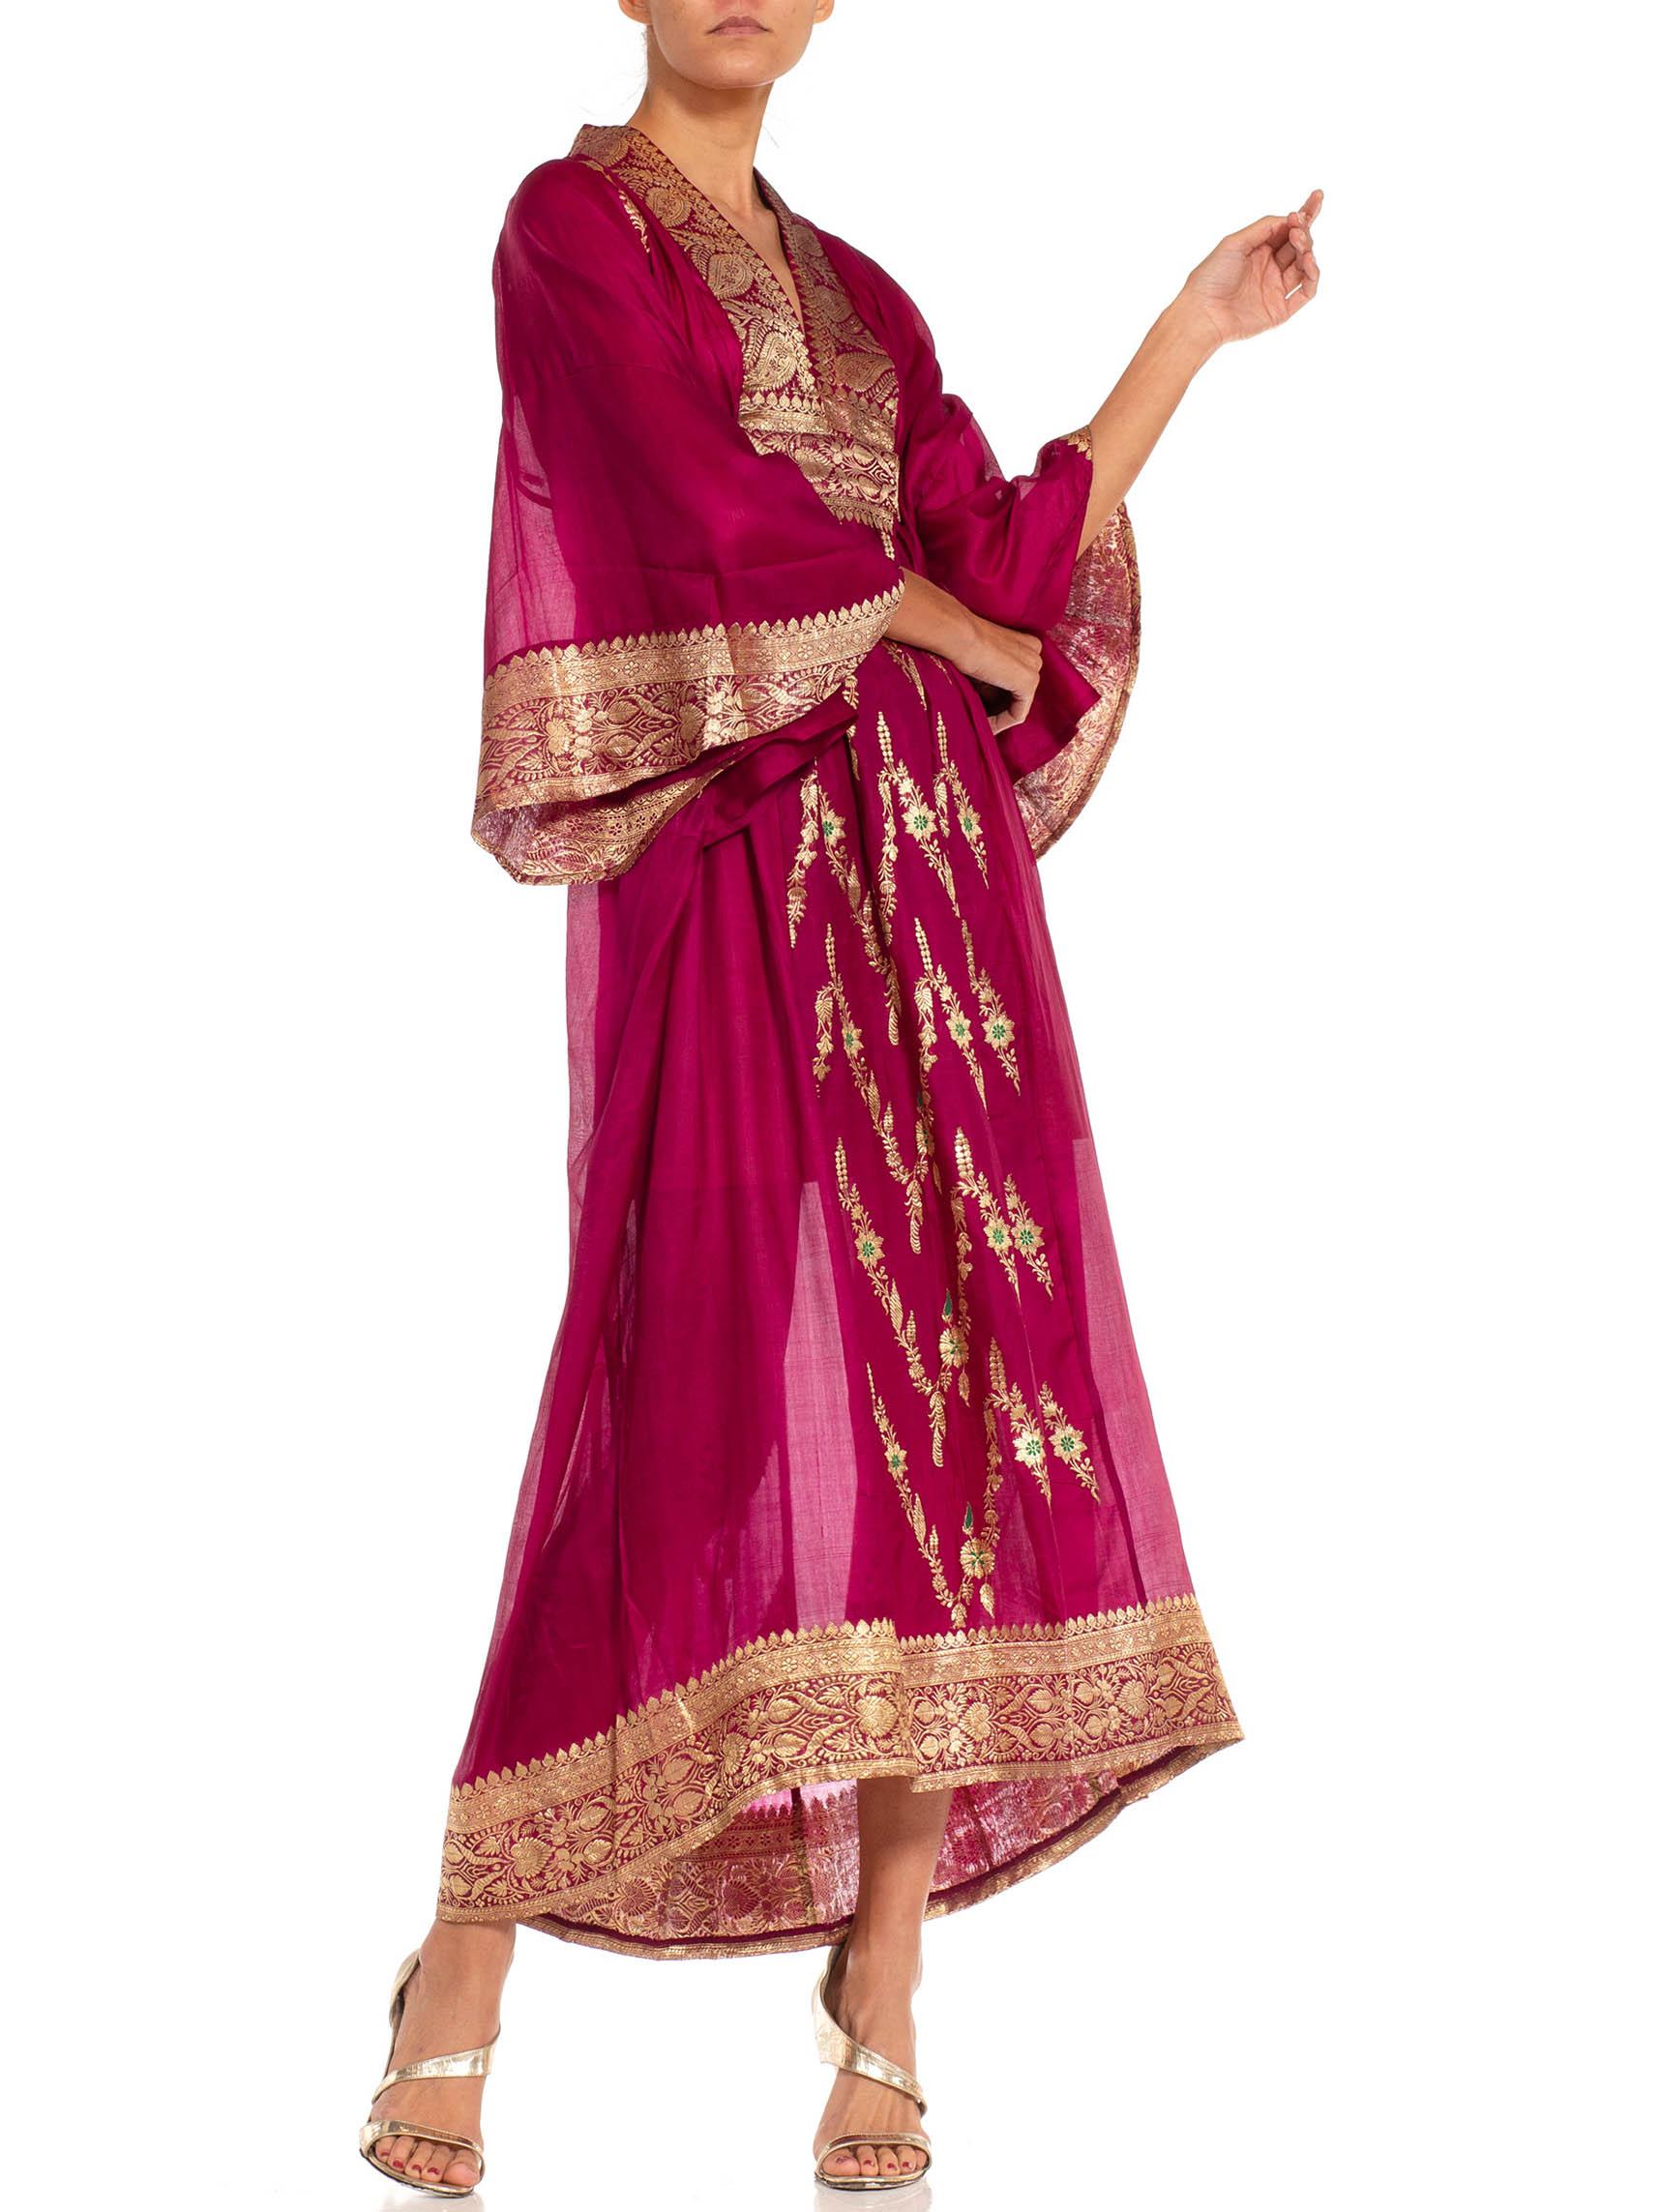 Women's Morphew Collection Fuchsia & Gold Silk Kaftan Made From Vintage Saris For Sale